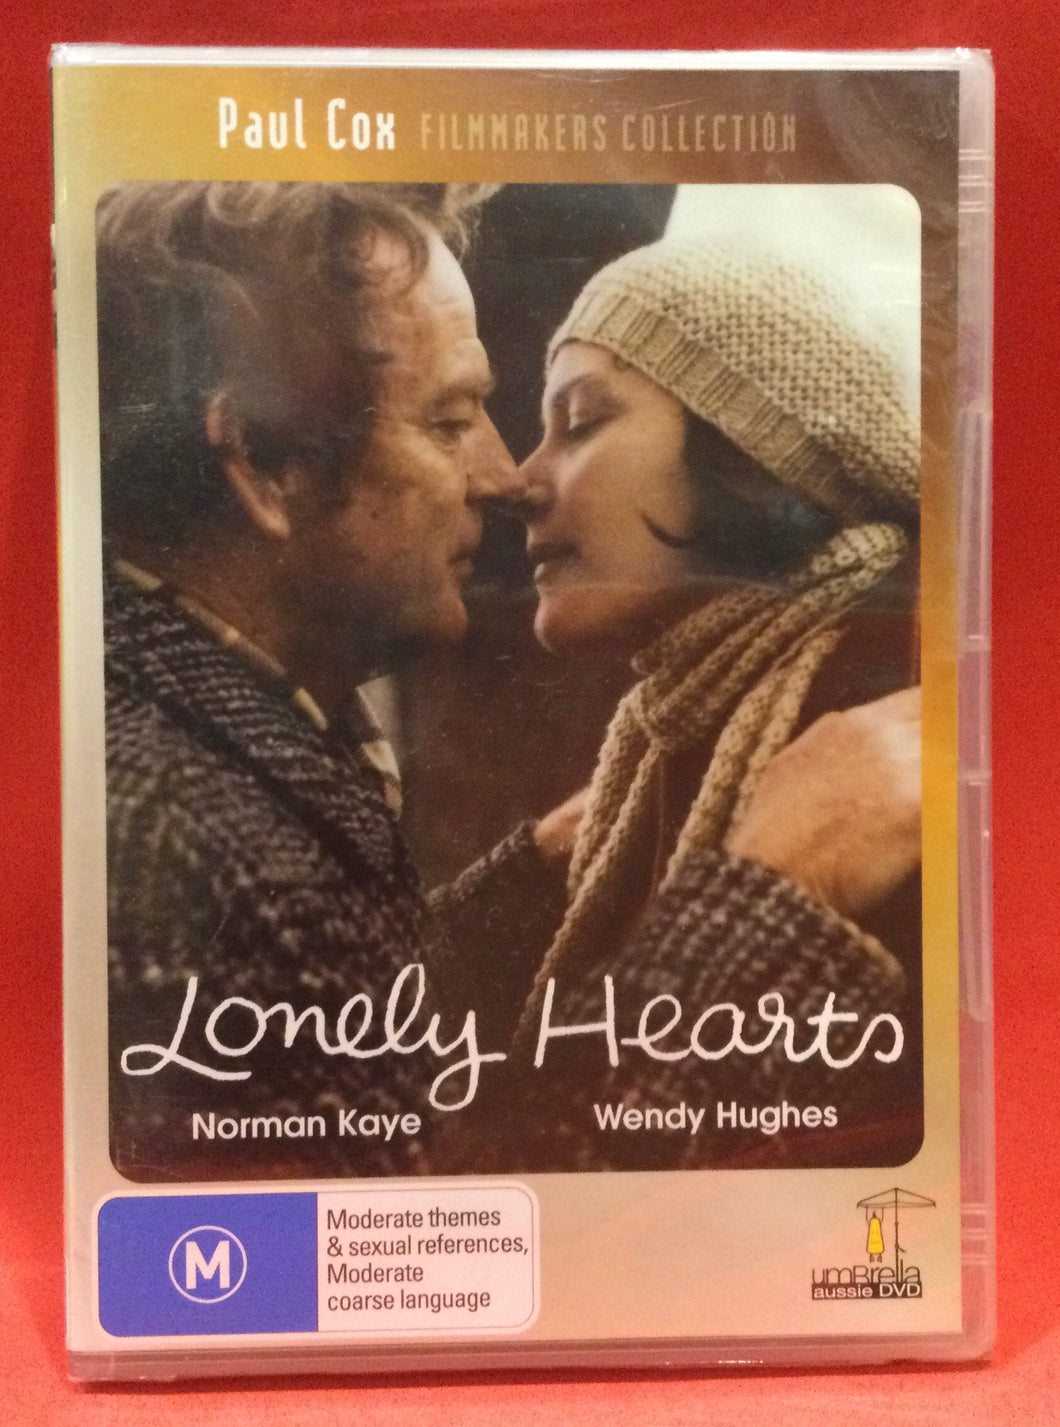 LONELY HEARTS DVD - PAUL COX COLLECTION  (SEALED)